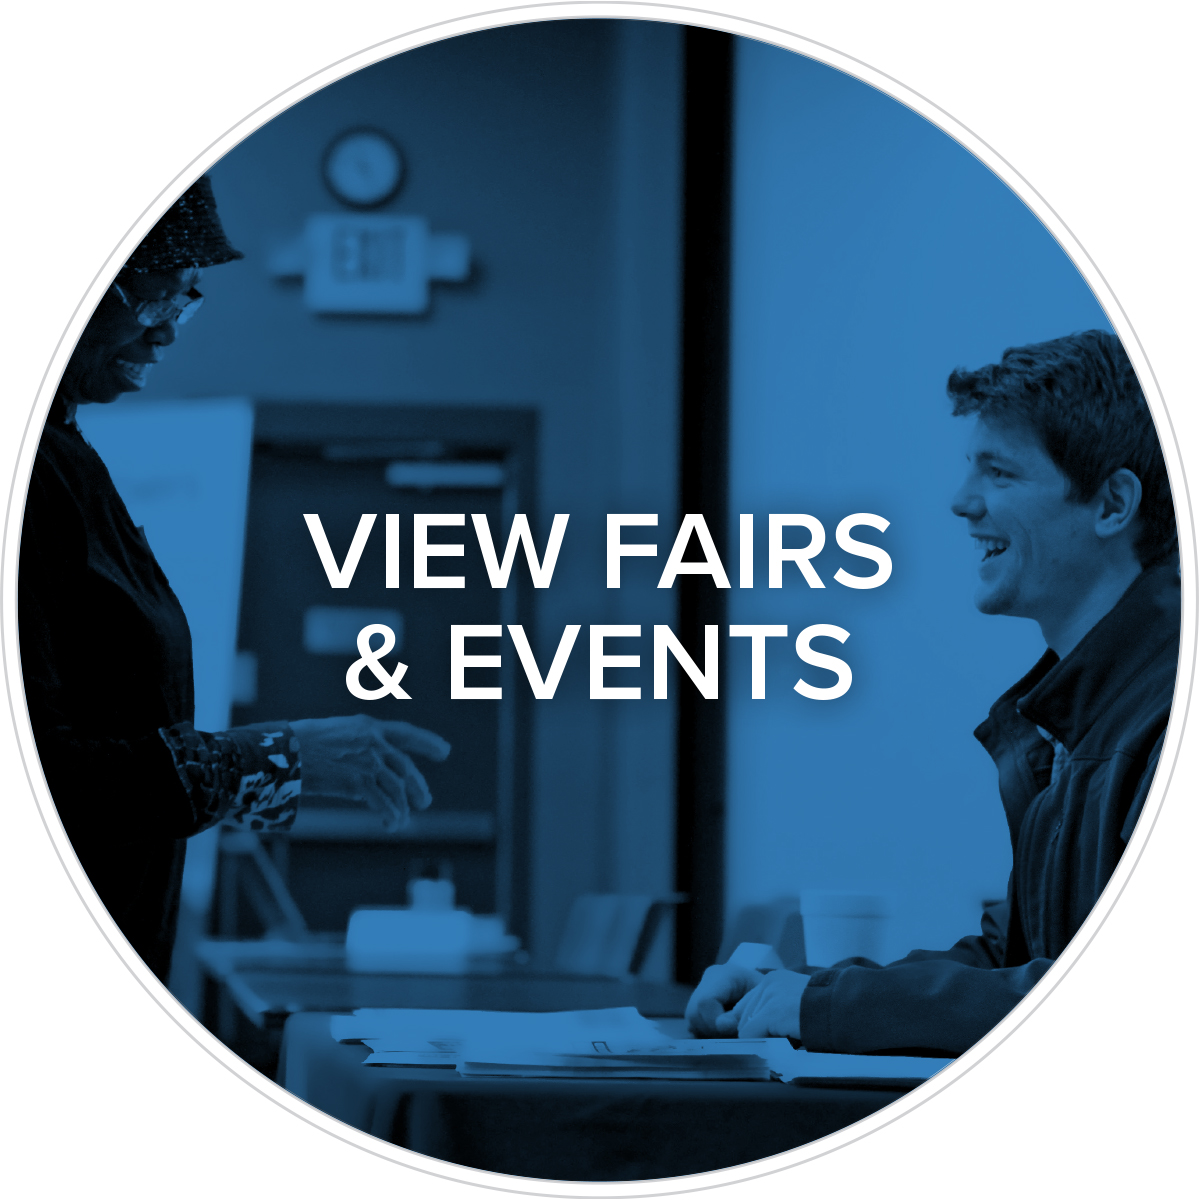 View Fairs & Events